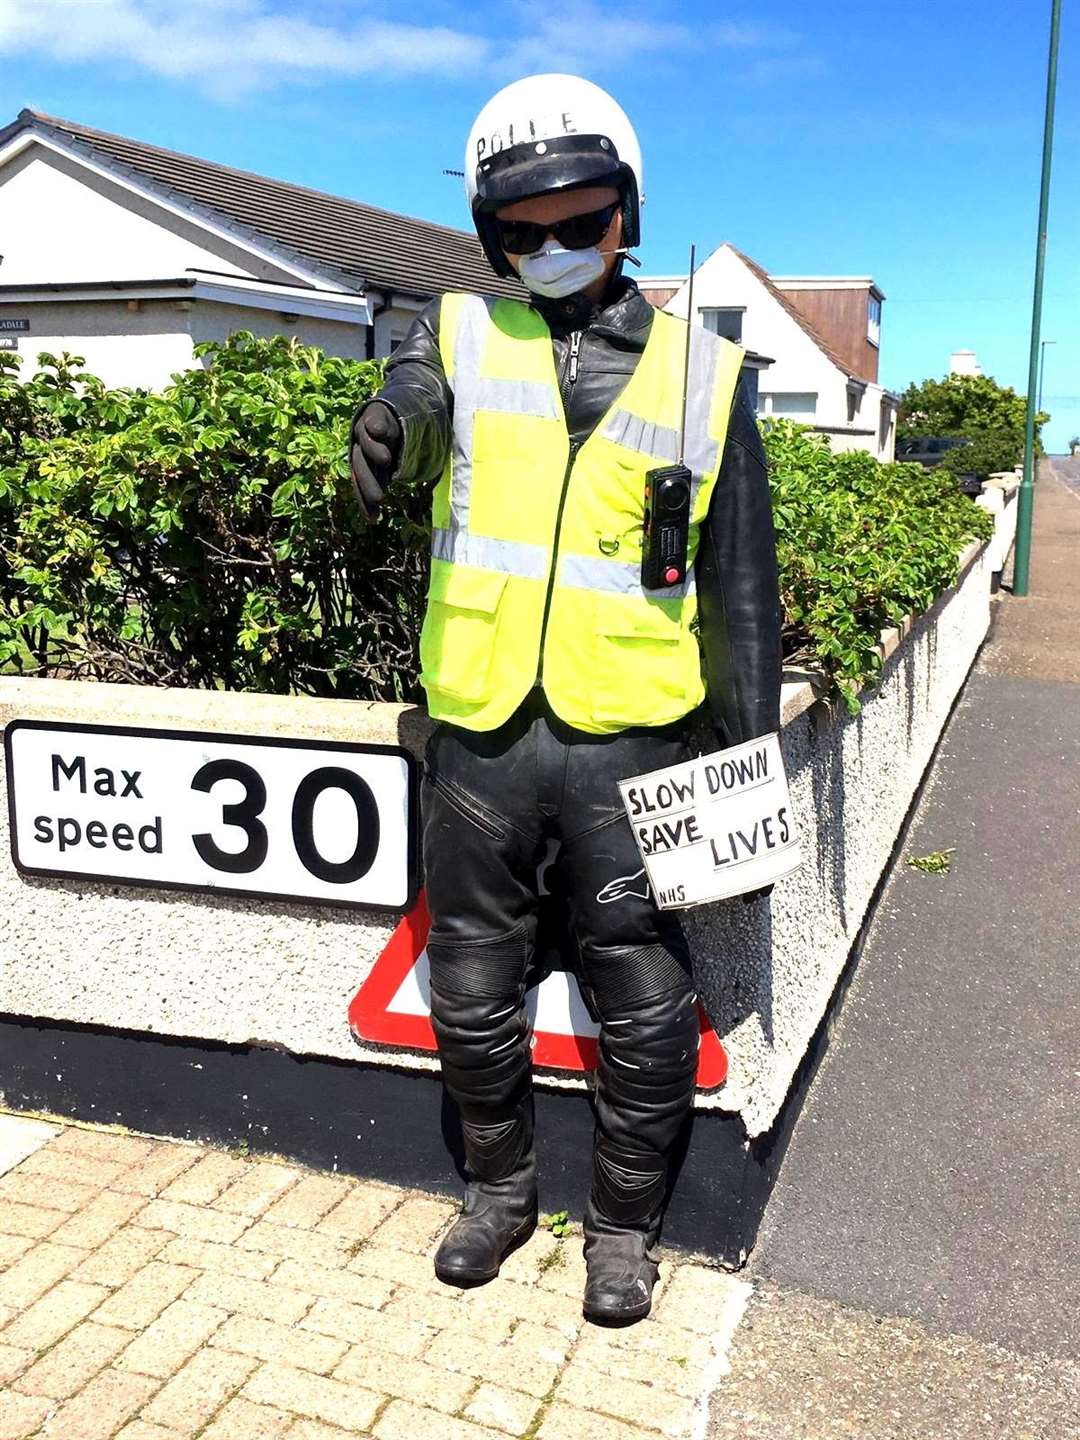 Looking the part in bike leathers is this Papigoe traffic police scarecrow created by Denny Swanson.